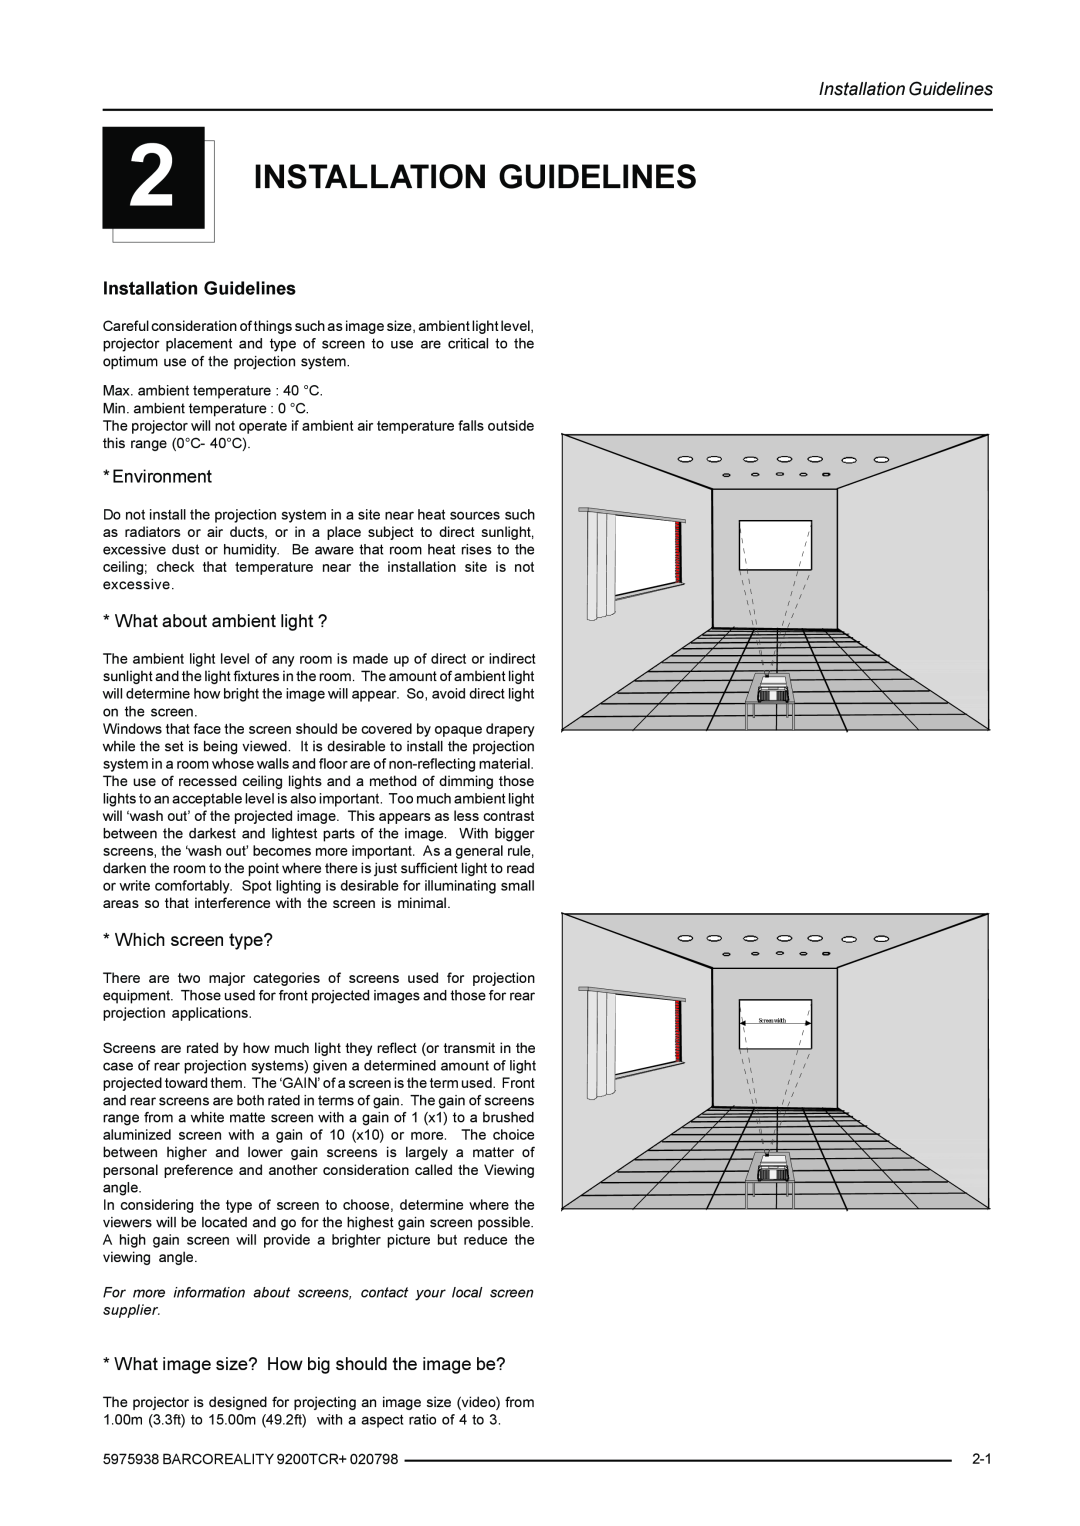 Barco R9001390 manual Installation Guidelines, Environment, What about ambient light ?, Which screen type?, 6FUHHQZKLGW 